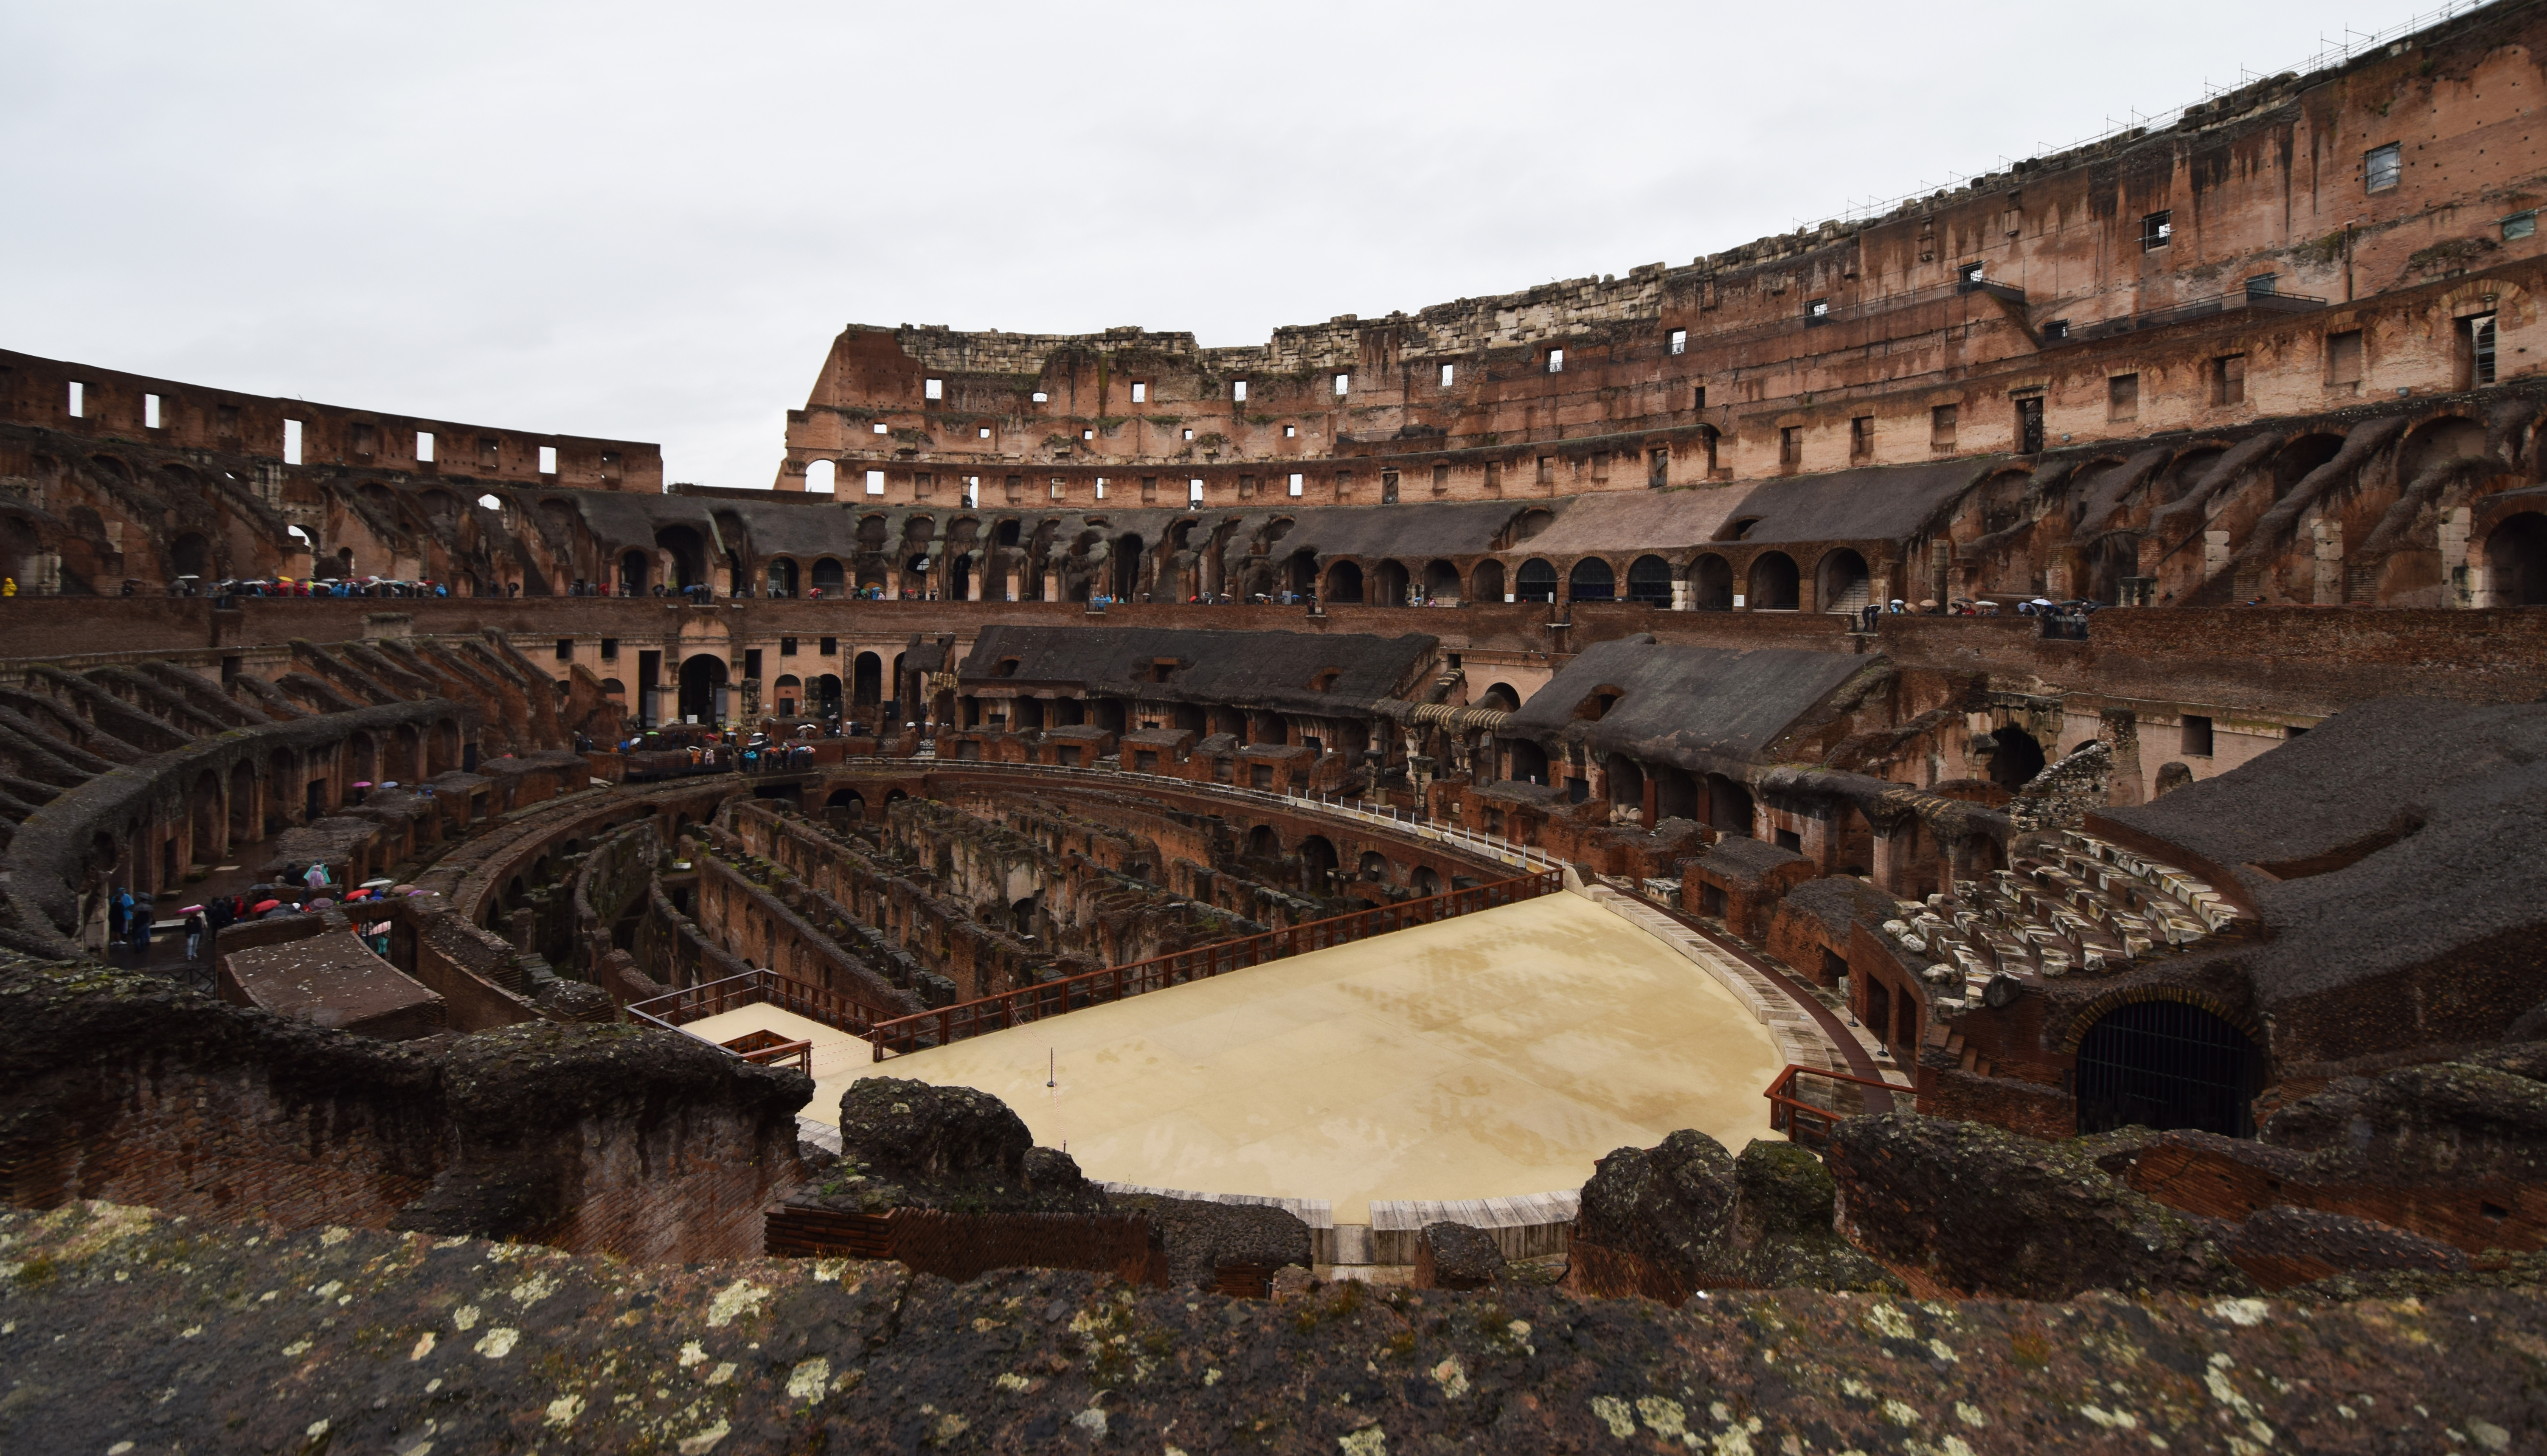 Forum and Colosseum Still Impress Today